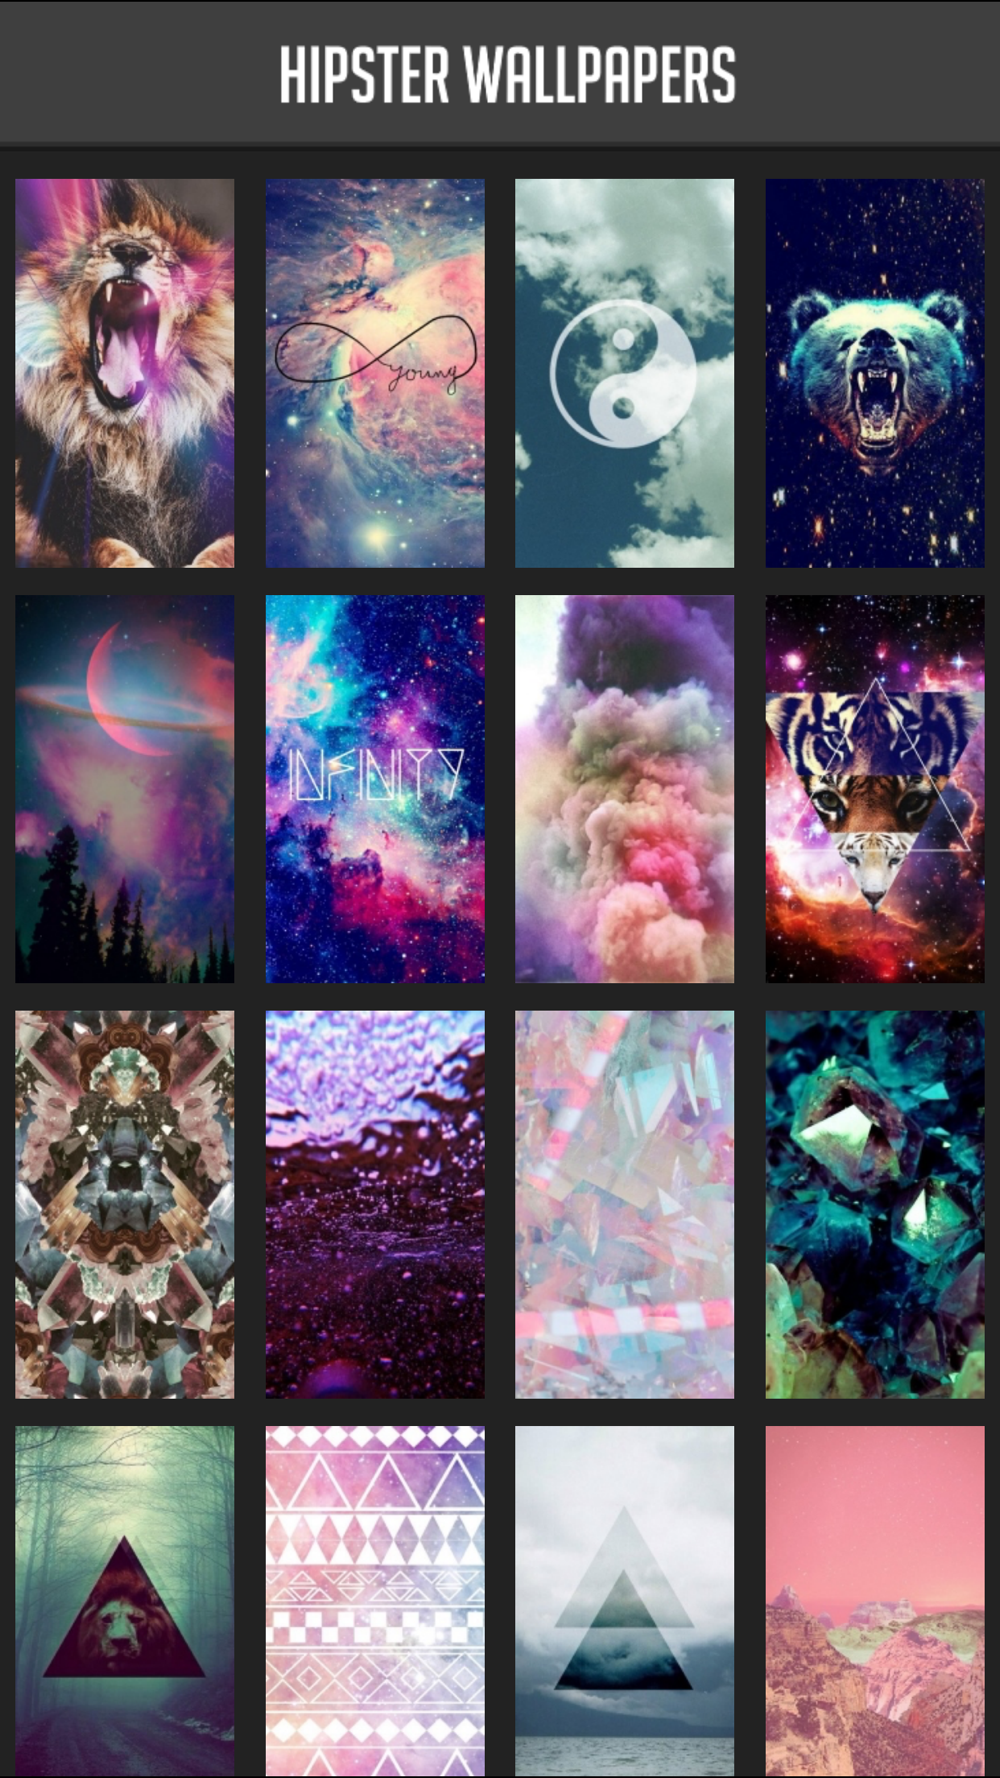 Hipster Wallpapers Free Download App for iPhone - STEPrimo.com